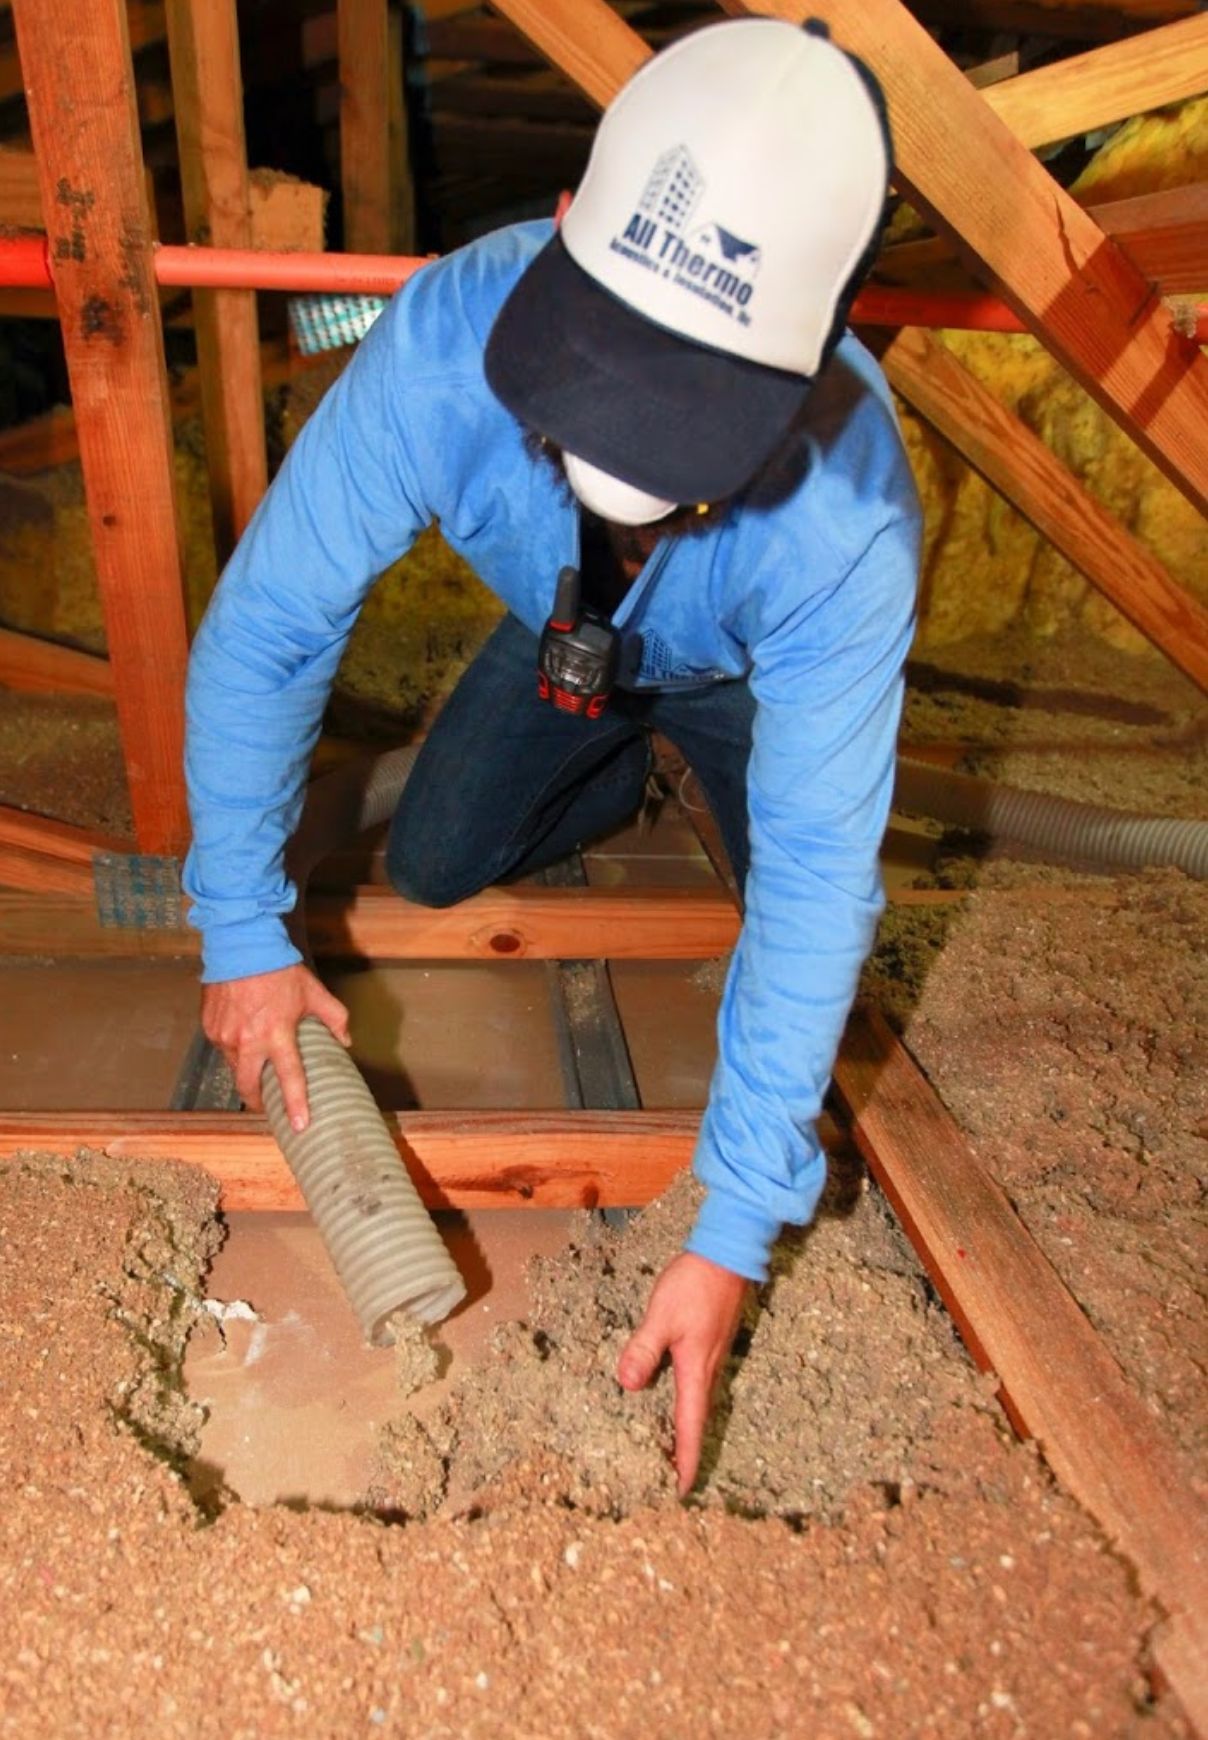 Removal/vacuuming cellulose insulation